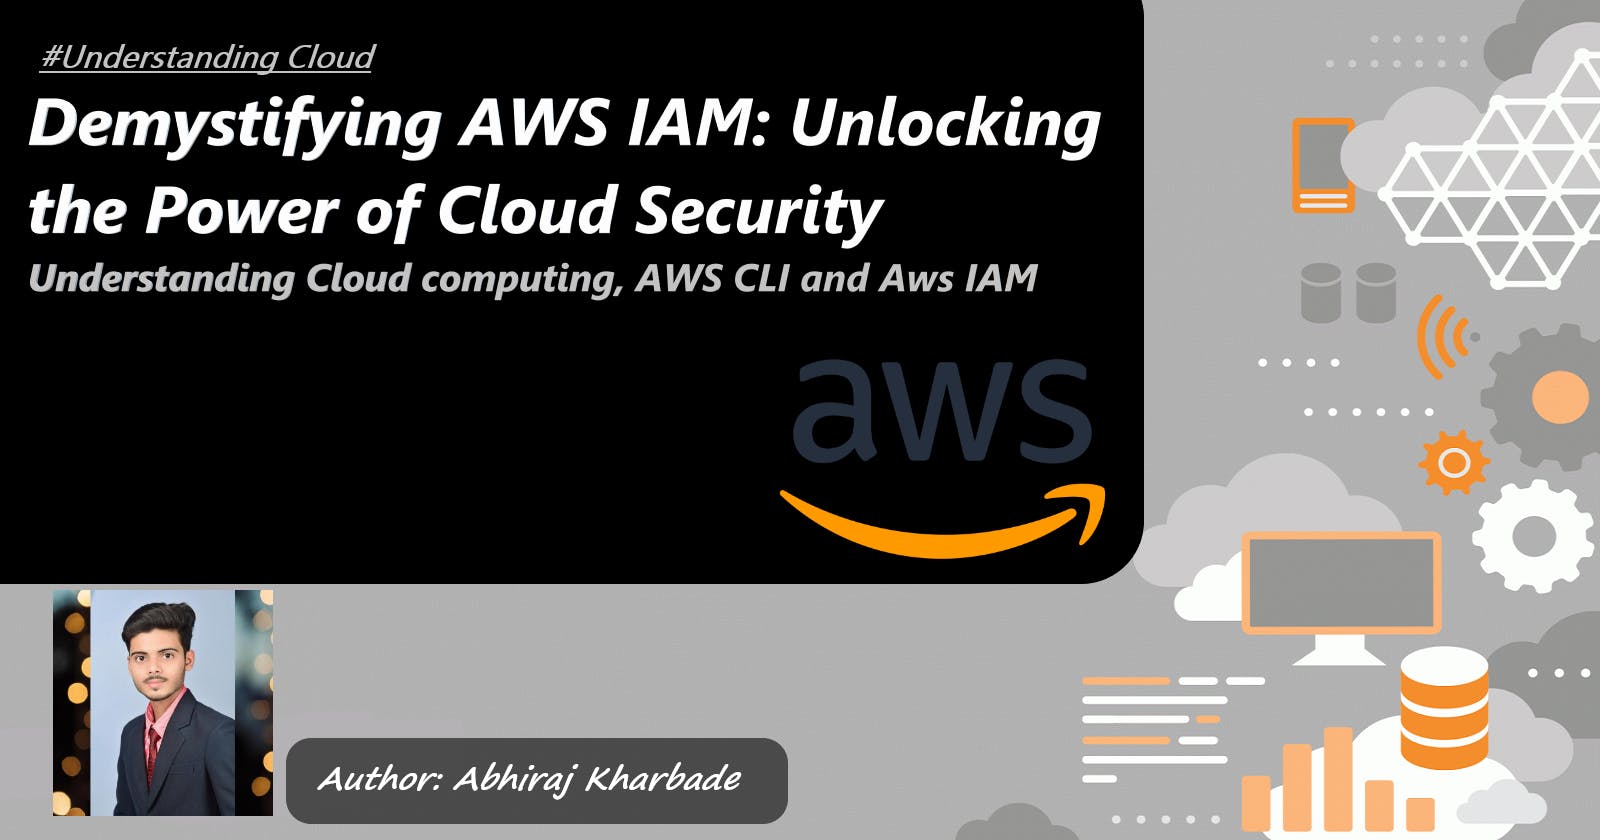 Demystifying AWS IAM: Unlocking the Power of Cloud Security